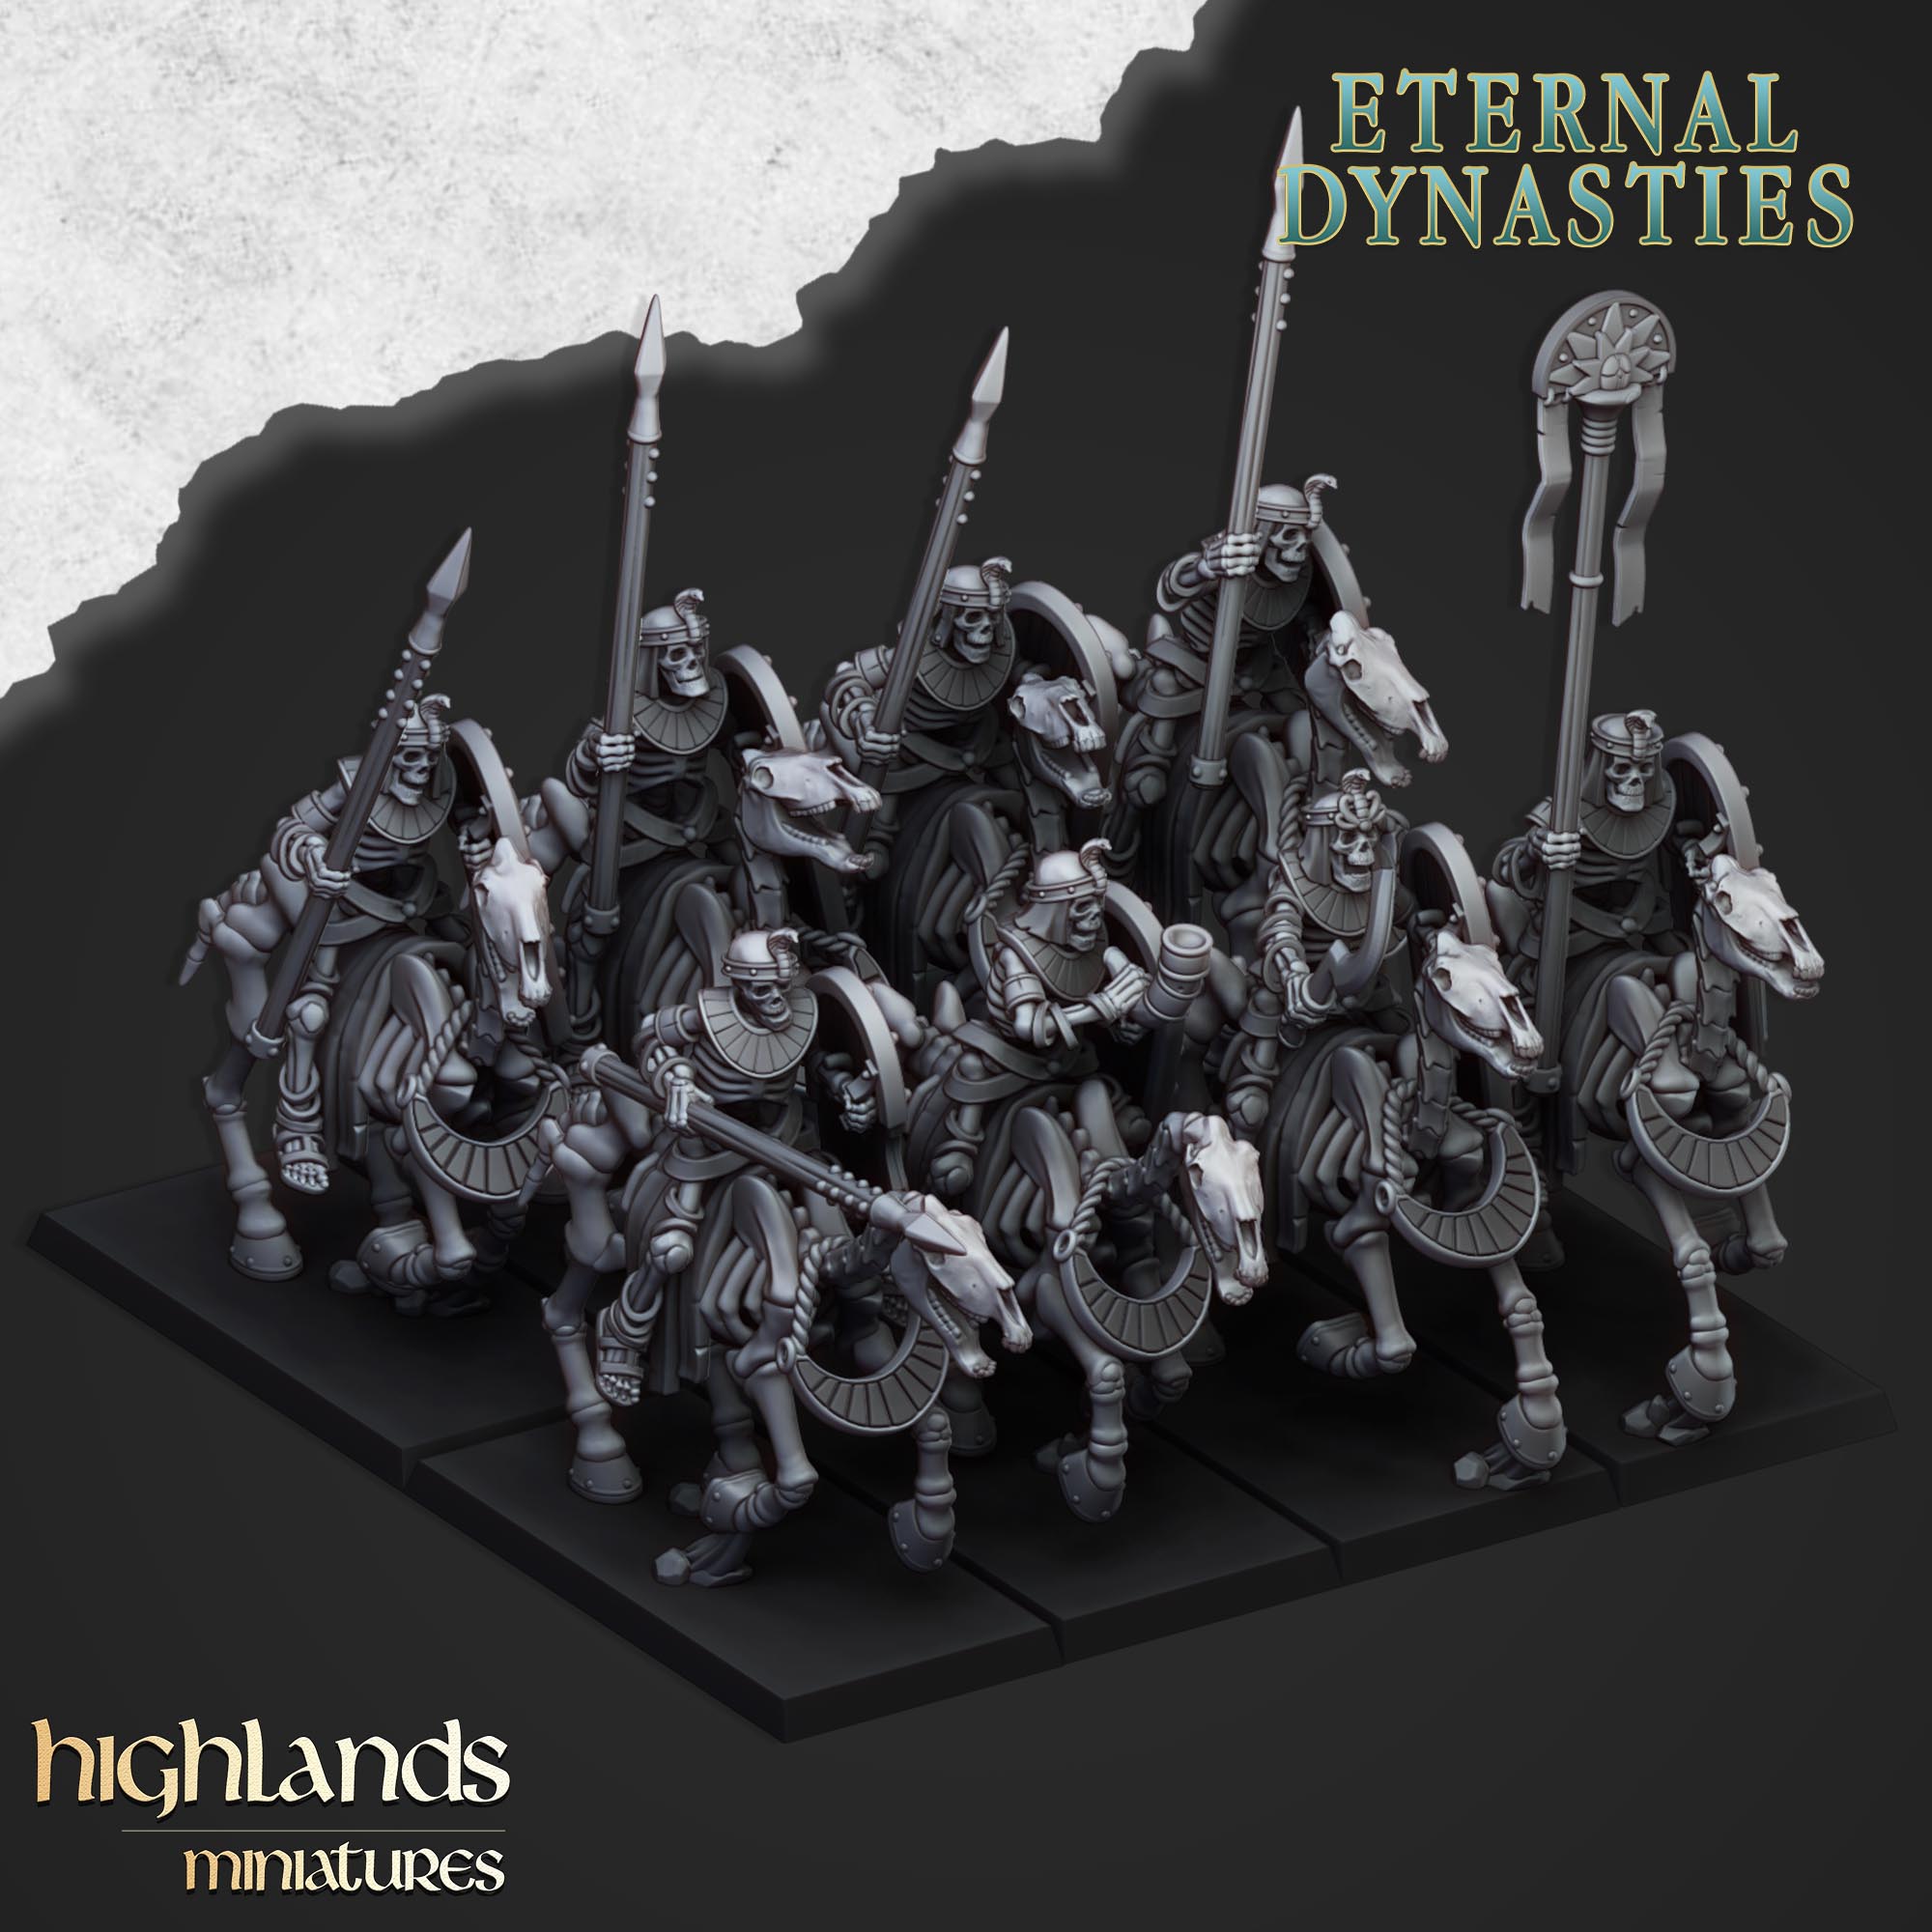 Ancient Skeletal Cavalry with Spears - Eternal Dynasties | Highlands Miniatures